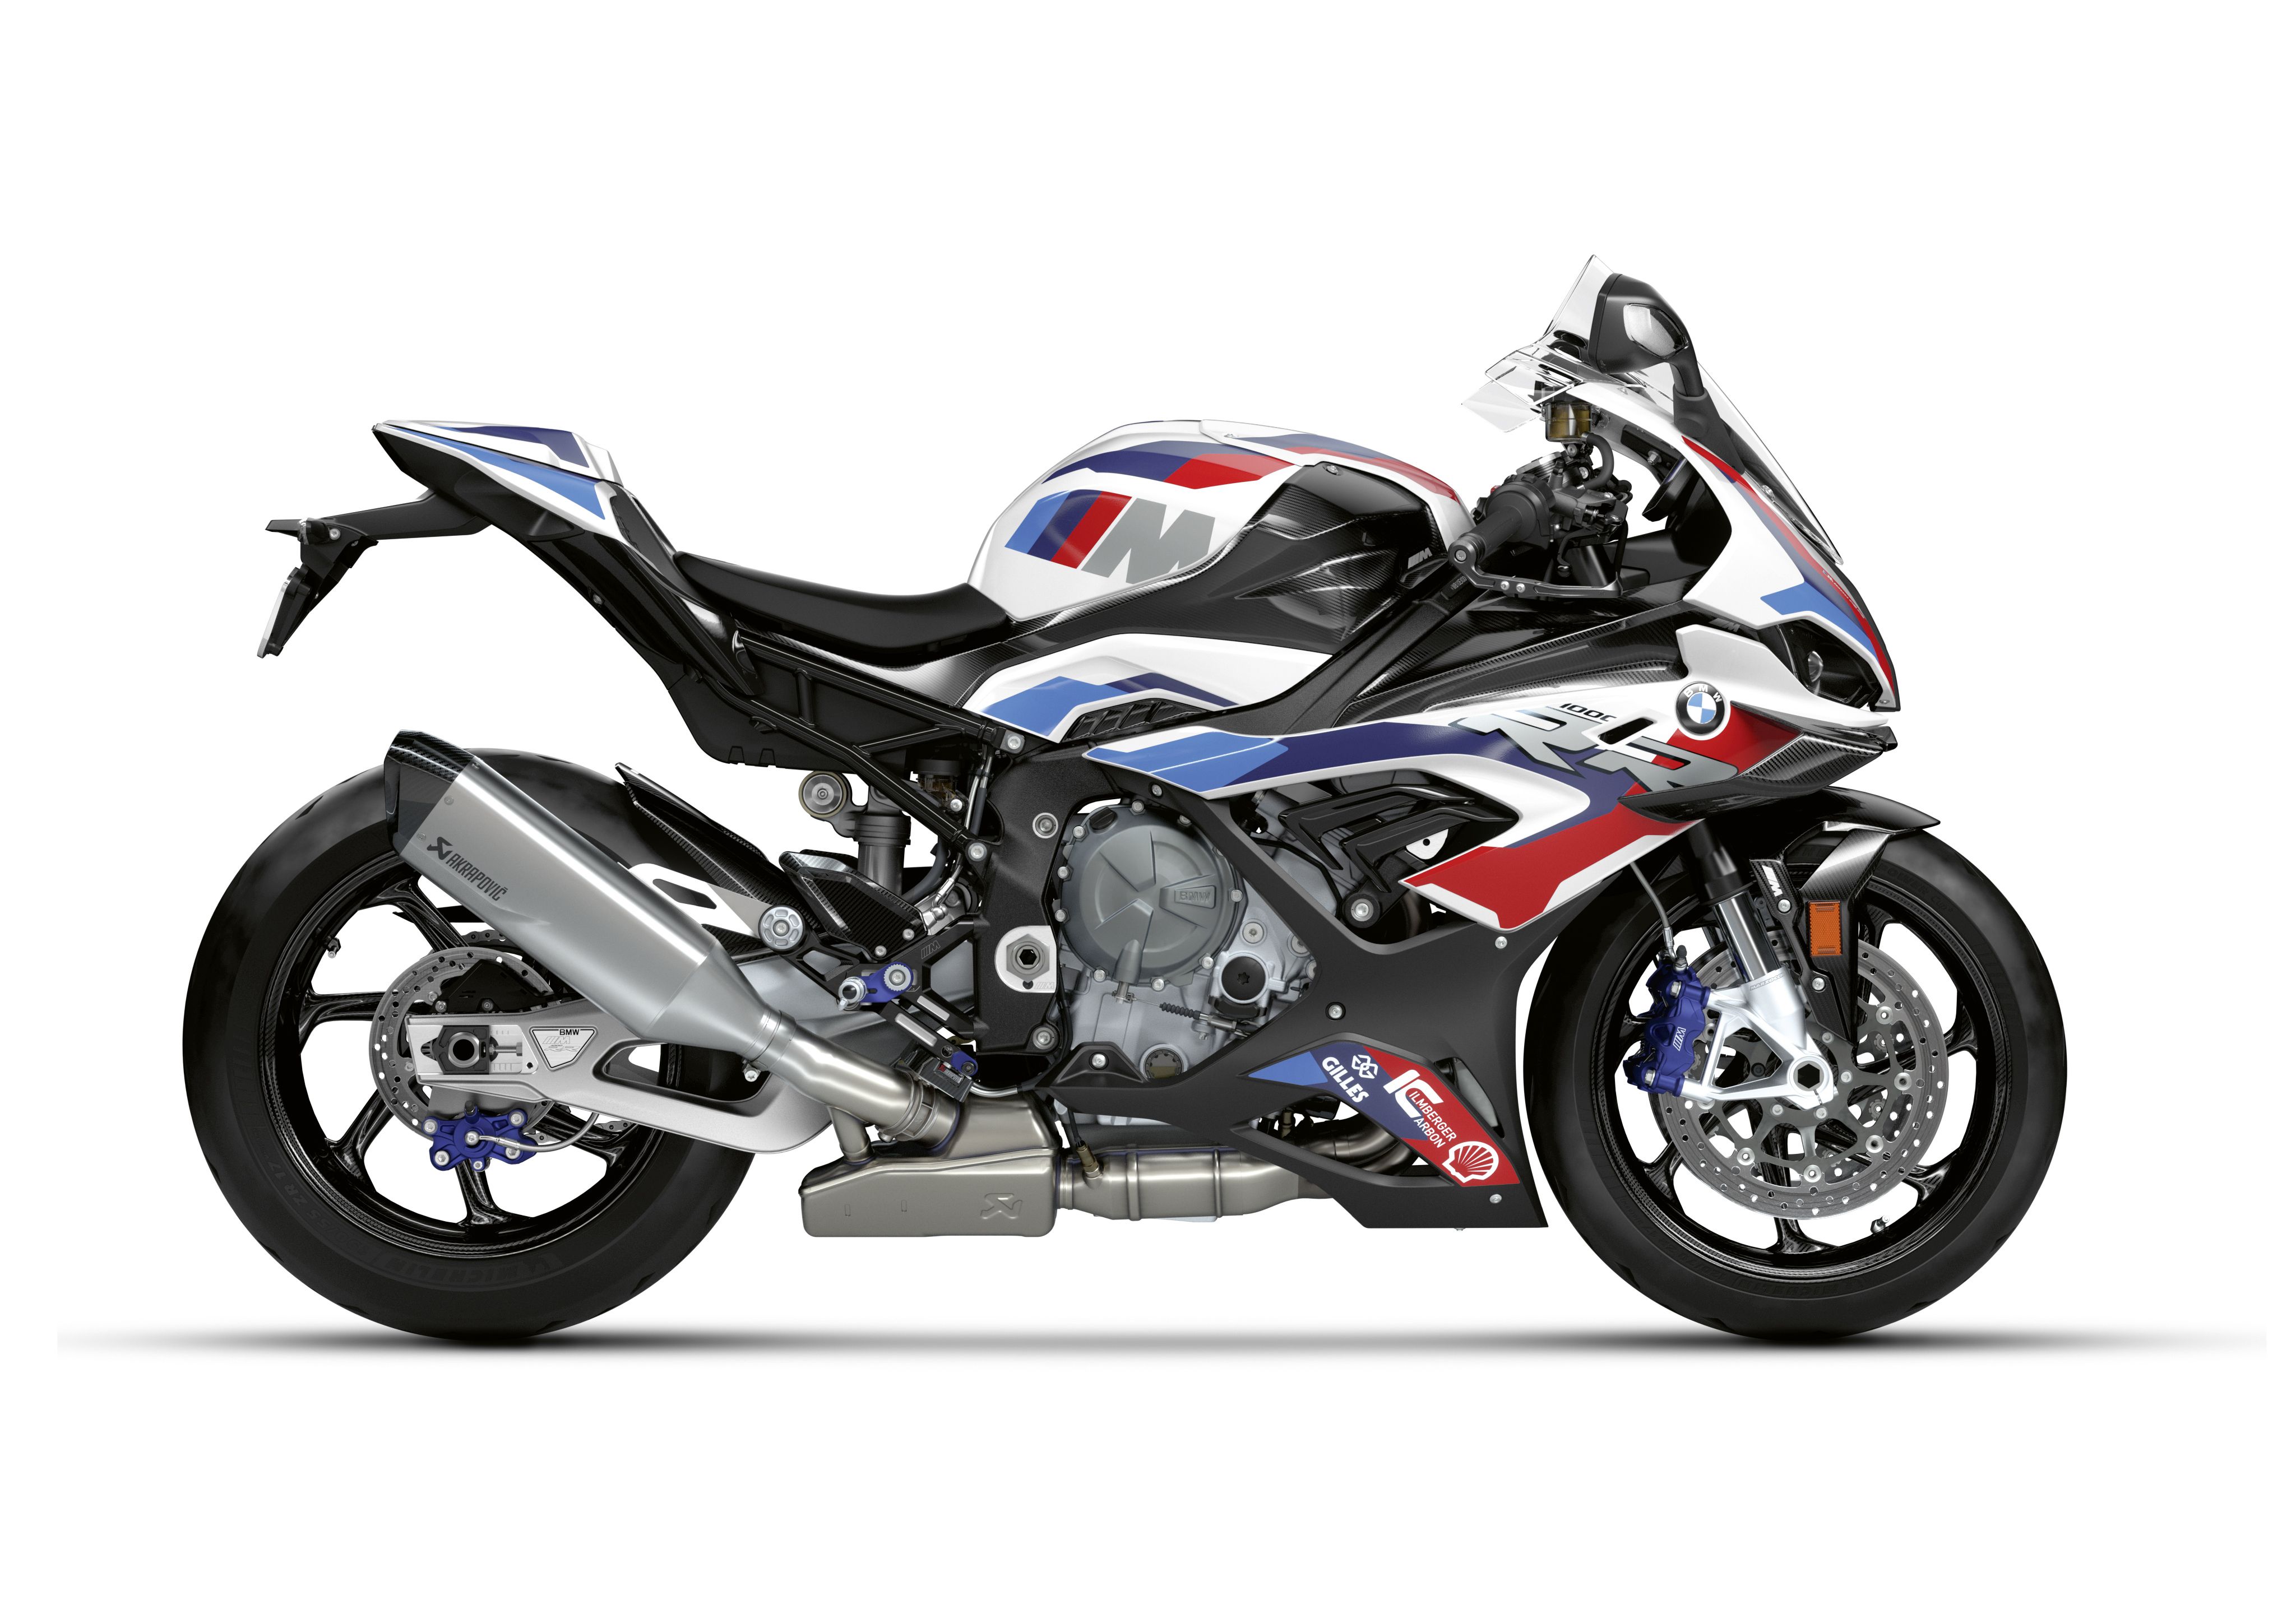 Bmw Expands M Line To Motorcycles With The Powerfully Fast M 1000 Rr